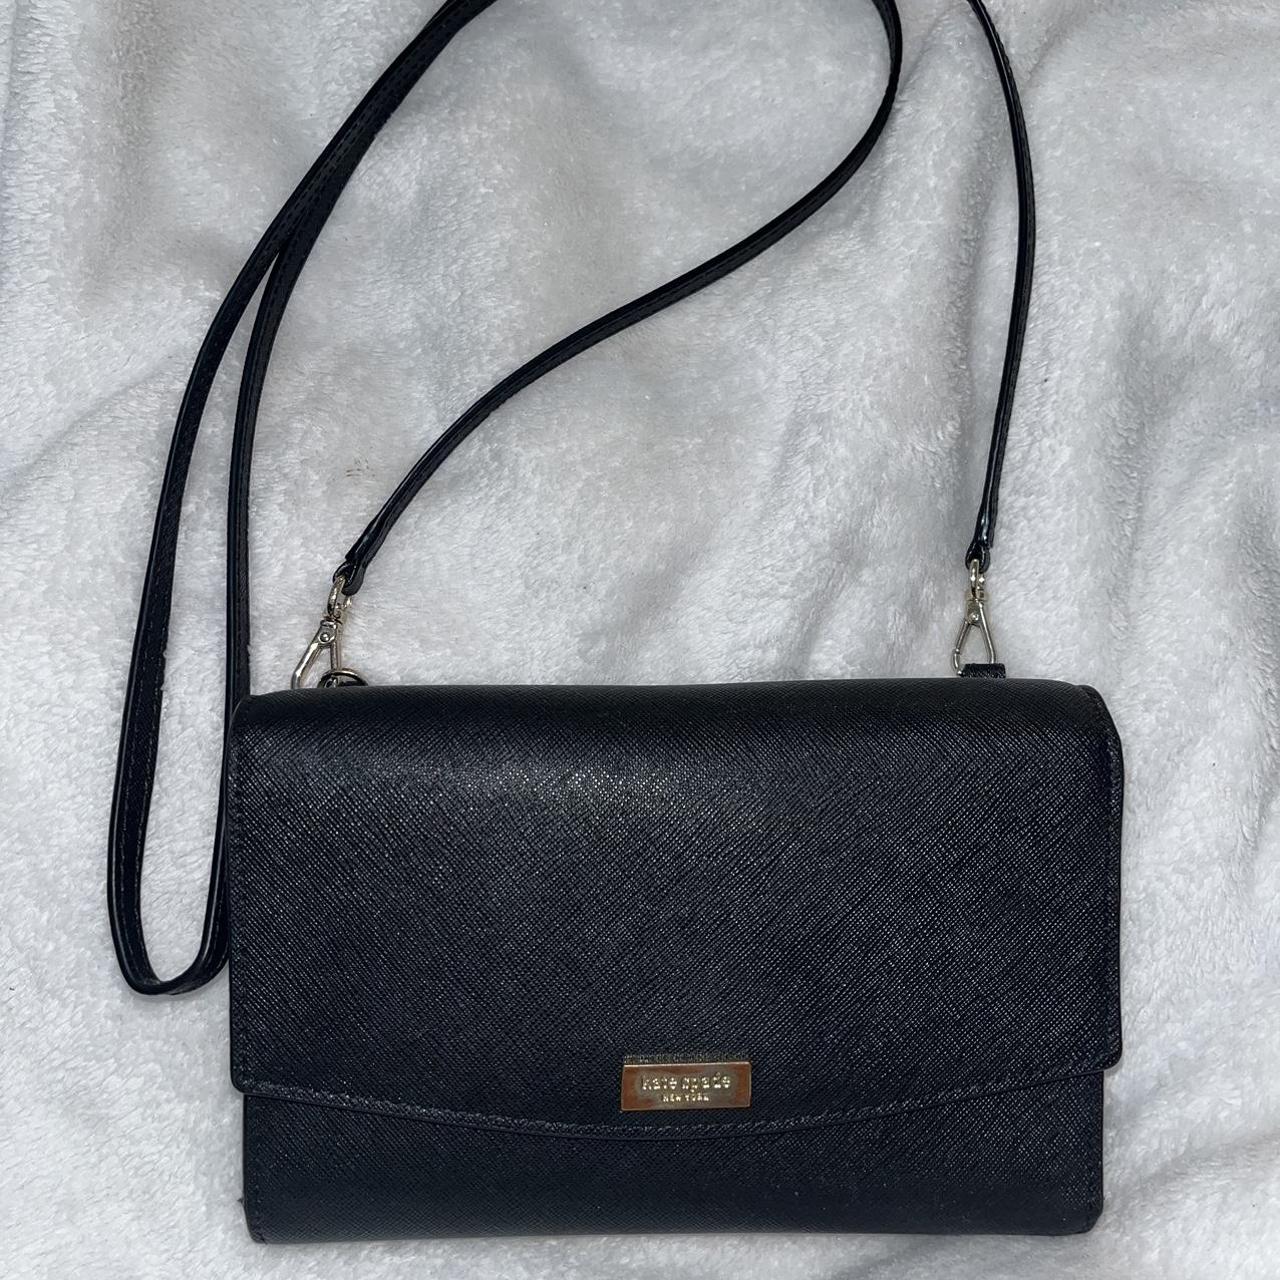 Kate Spade New York  Women's Black and Gold Bag